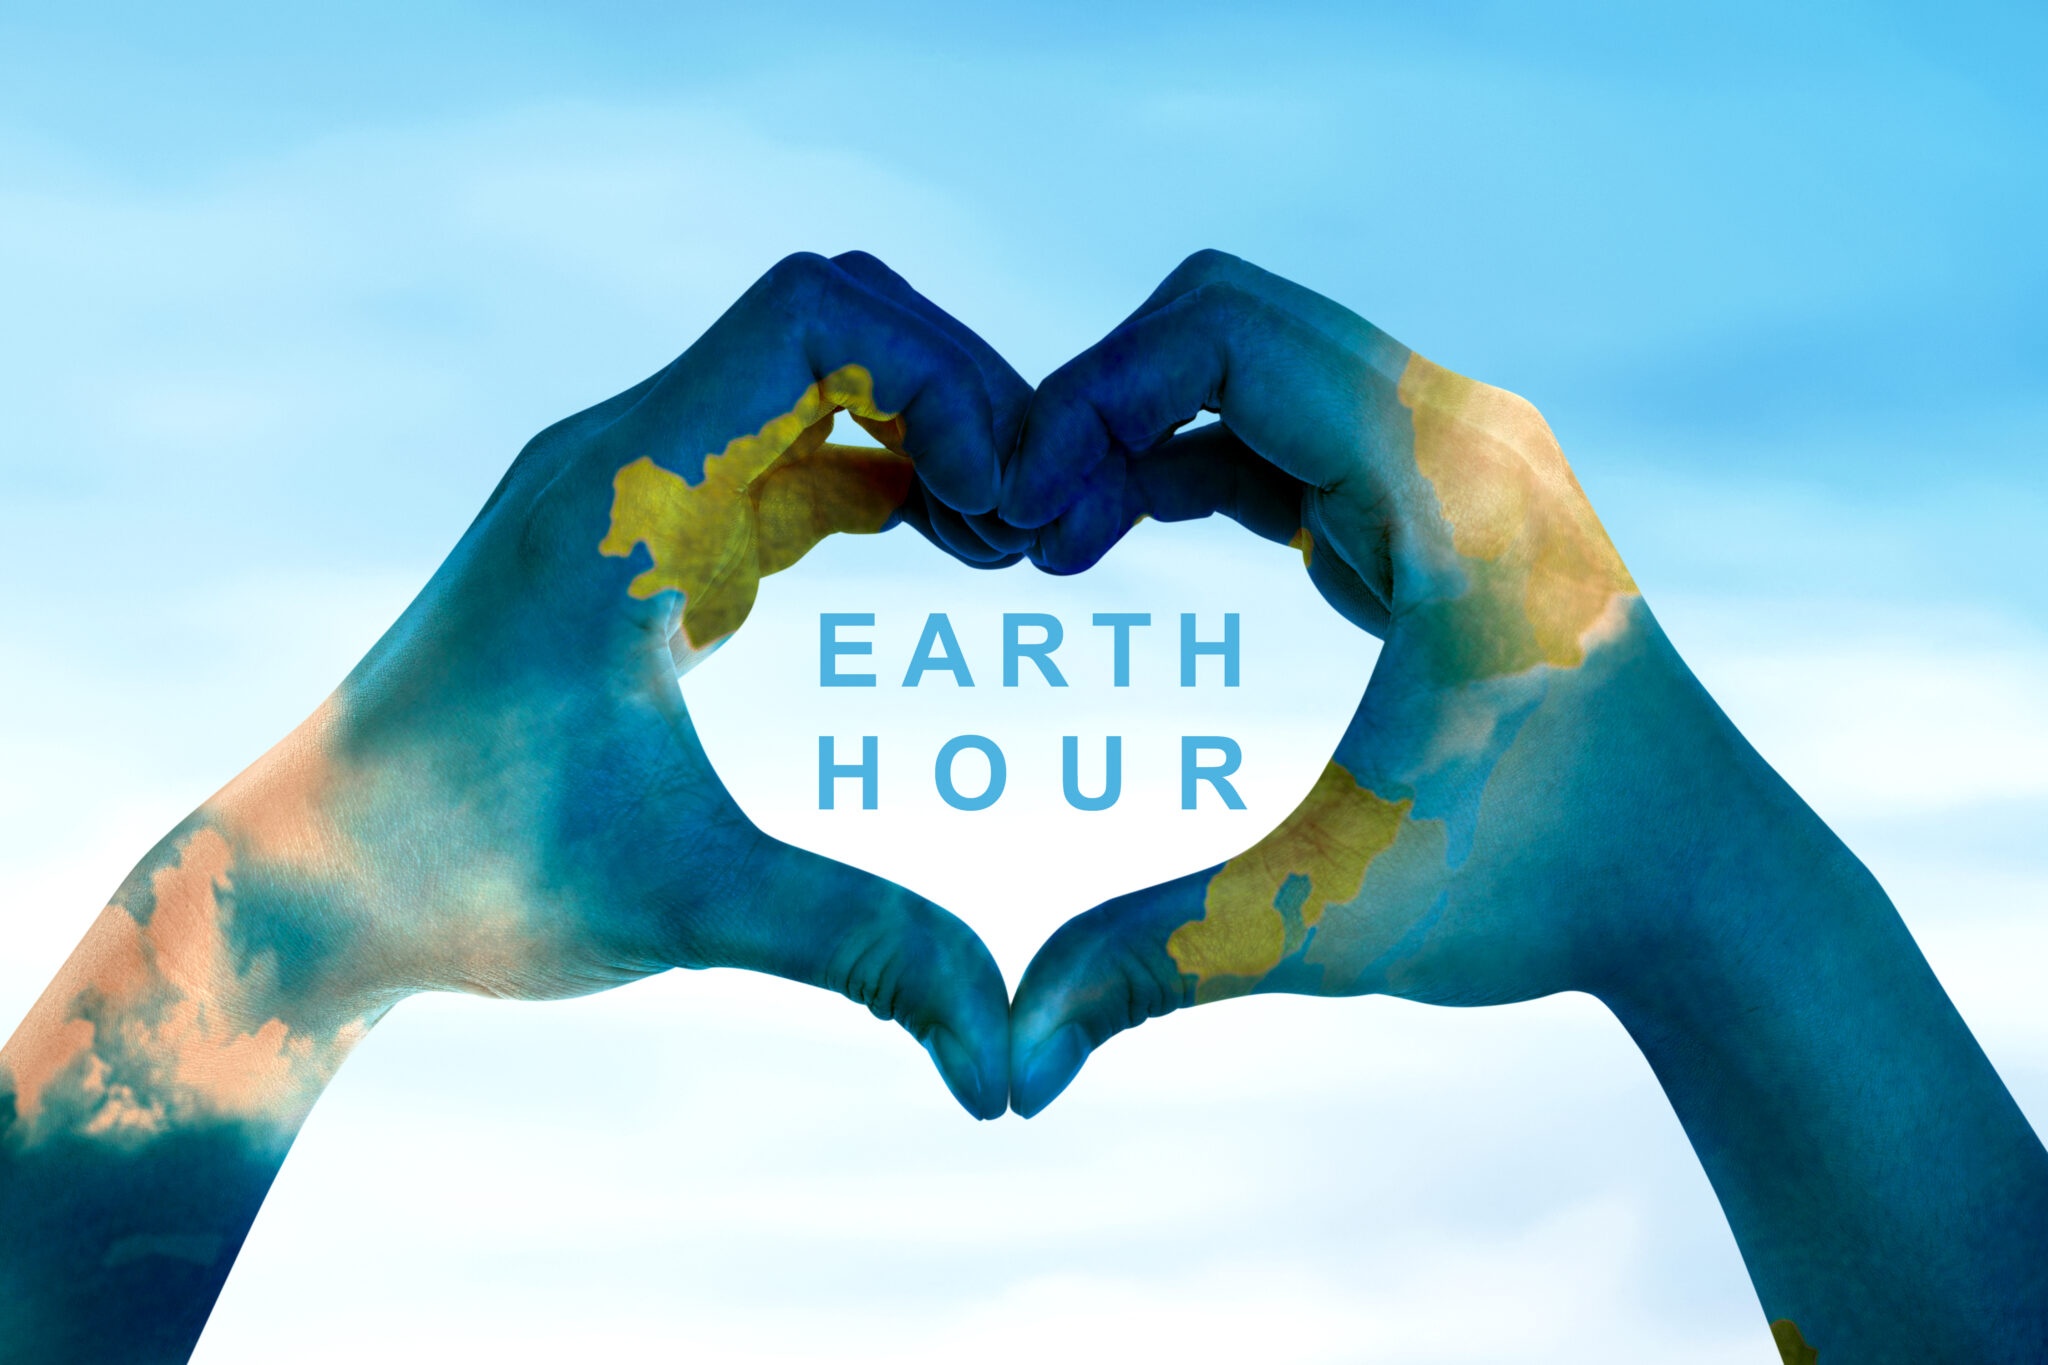 Human hands with world map skin make a heart shape with earth hour text over blue sky background. Earth hour concept.